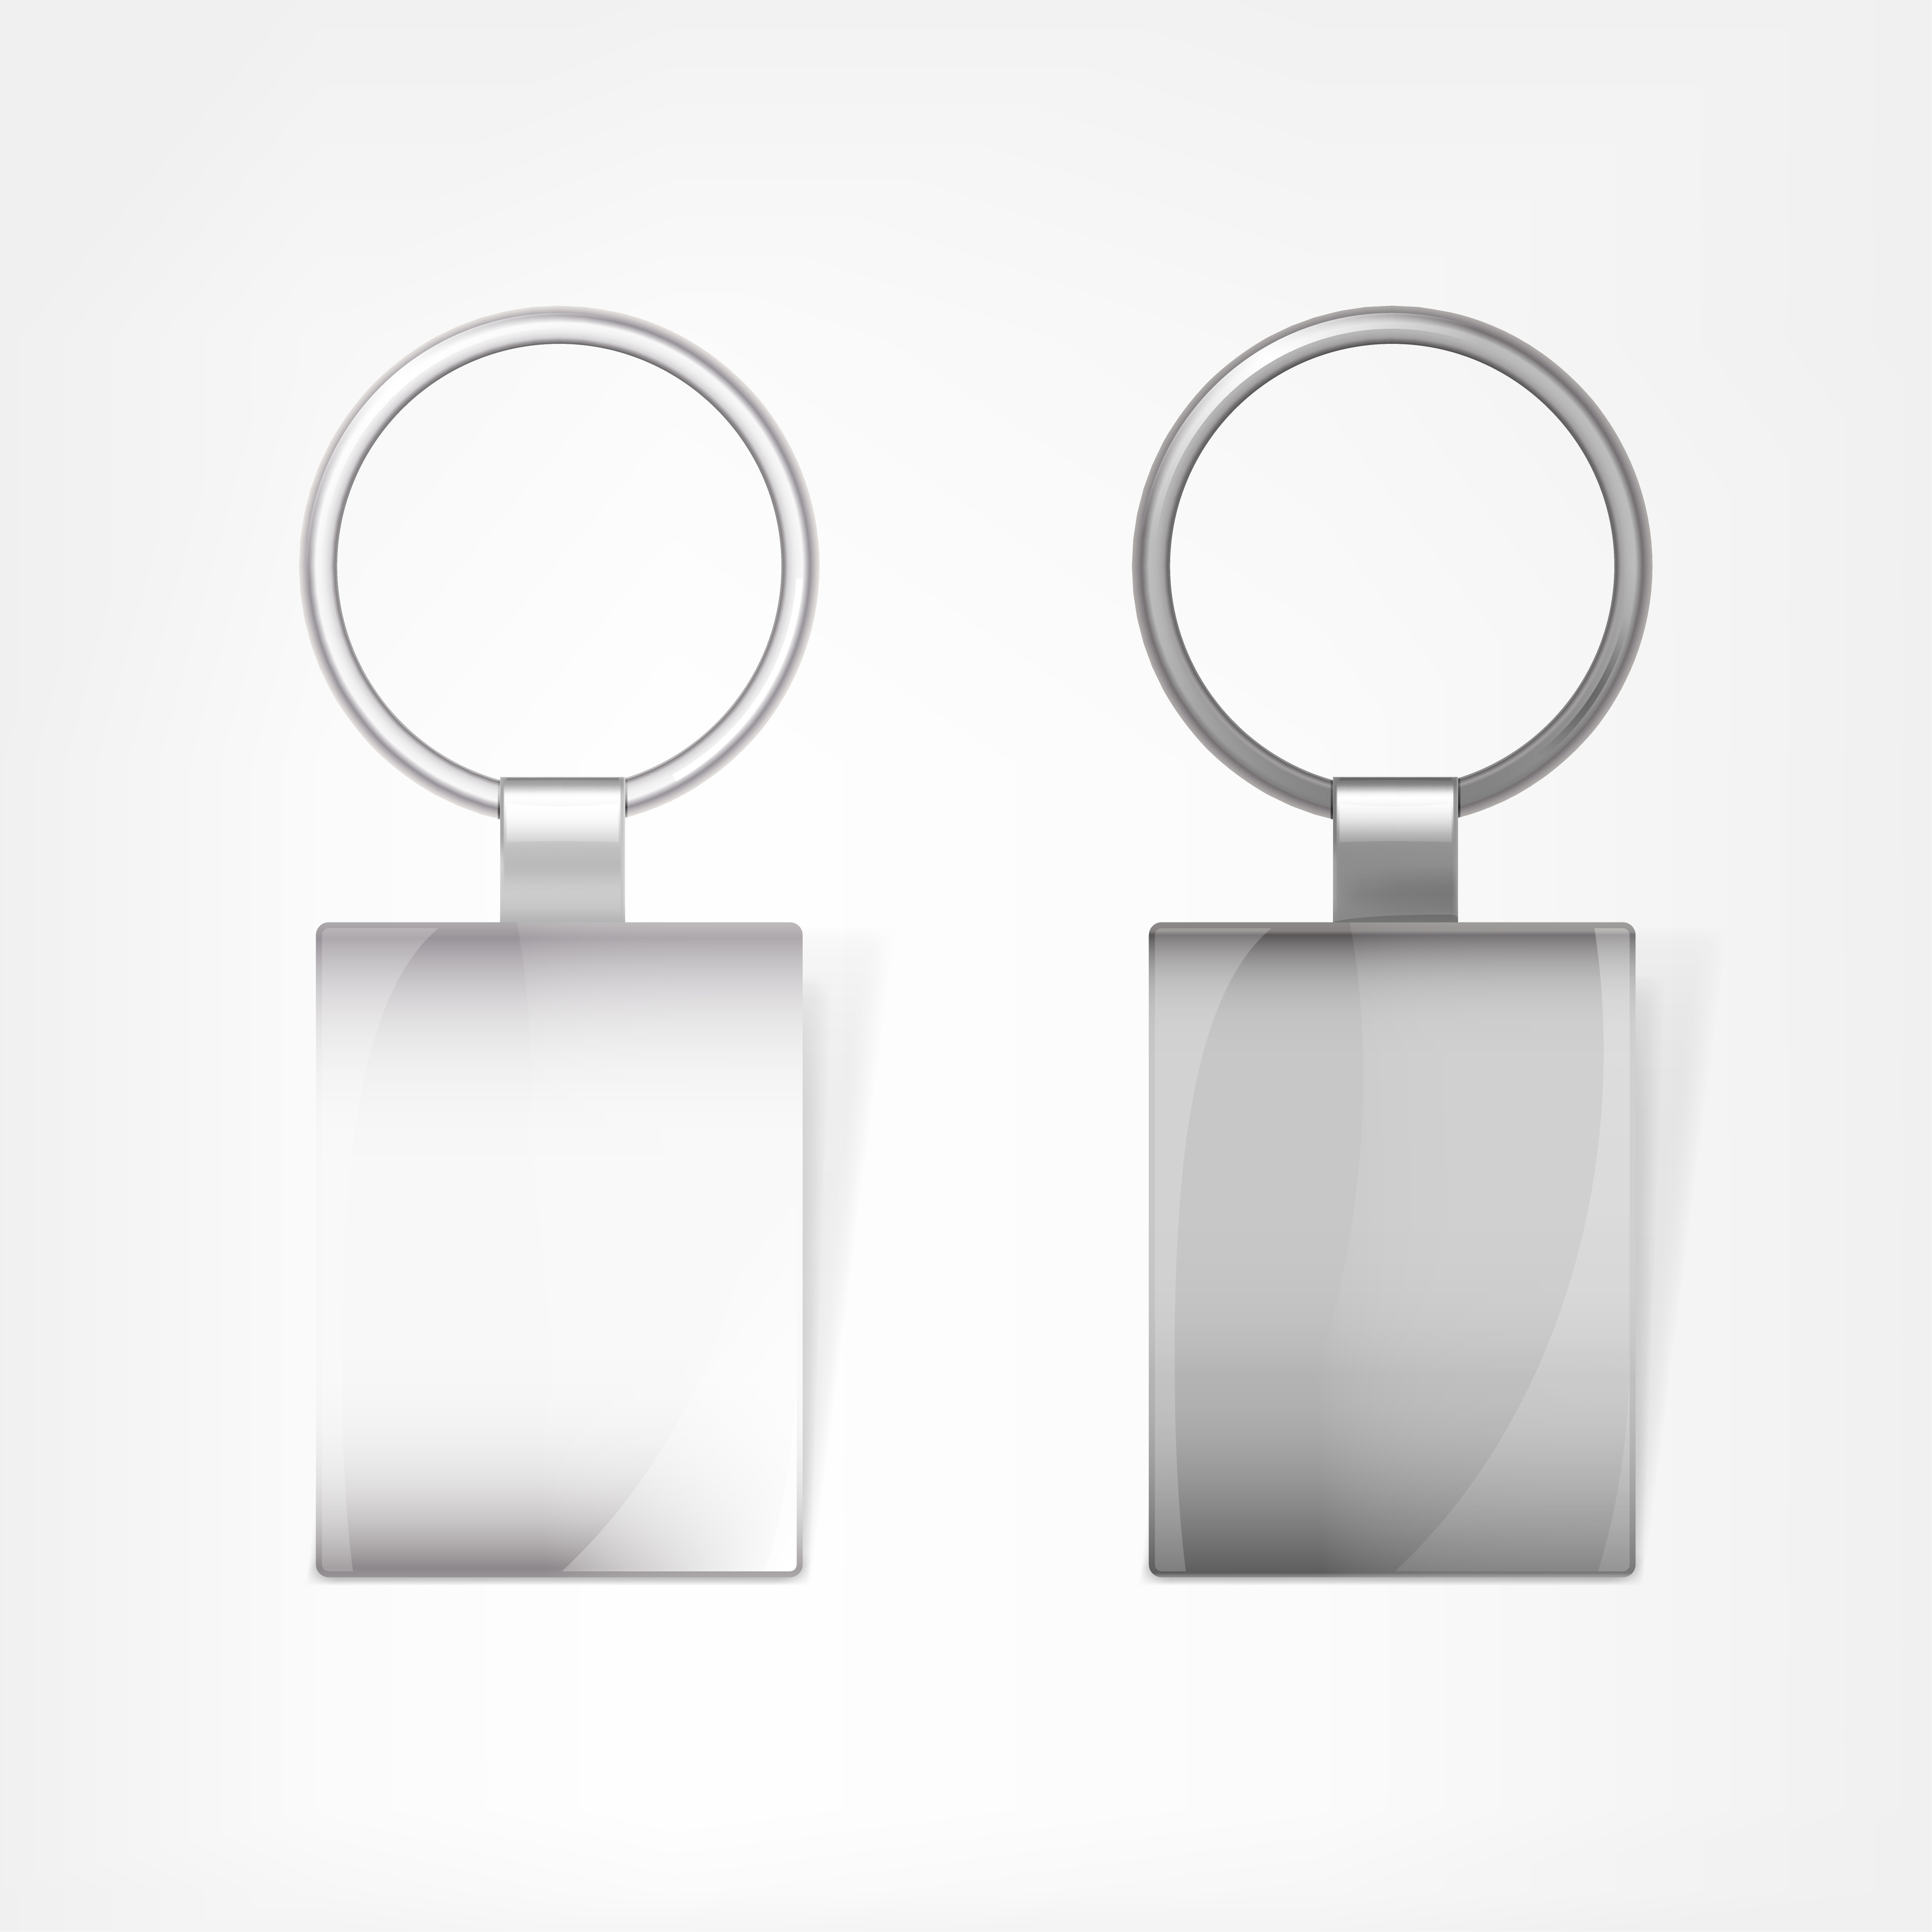 Download Shining keychain template vectors 02 free download